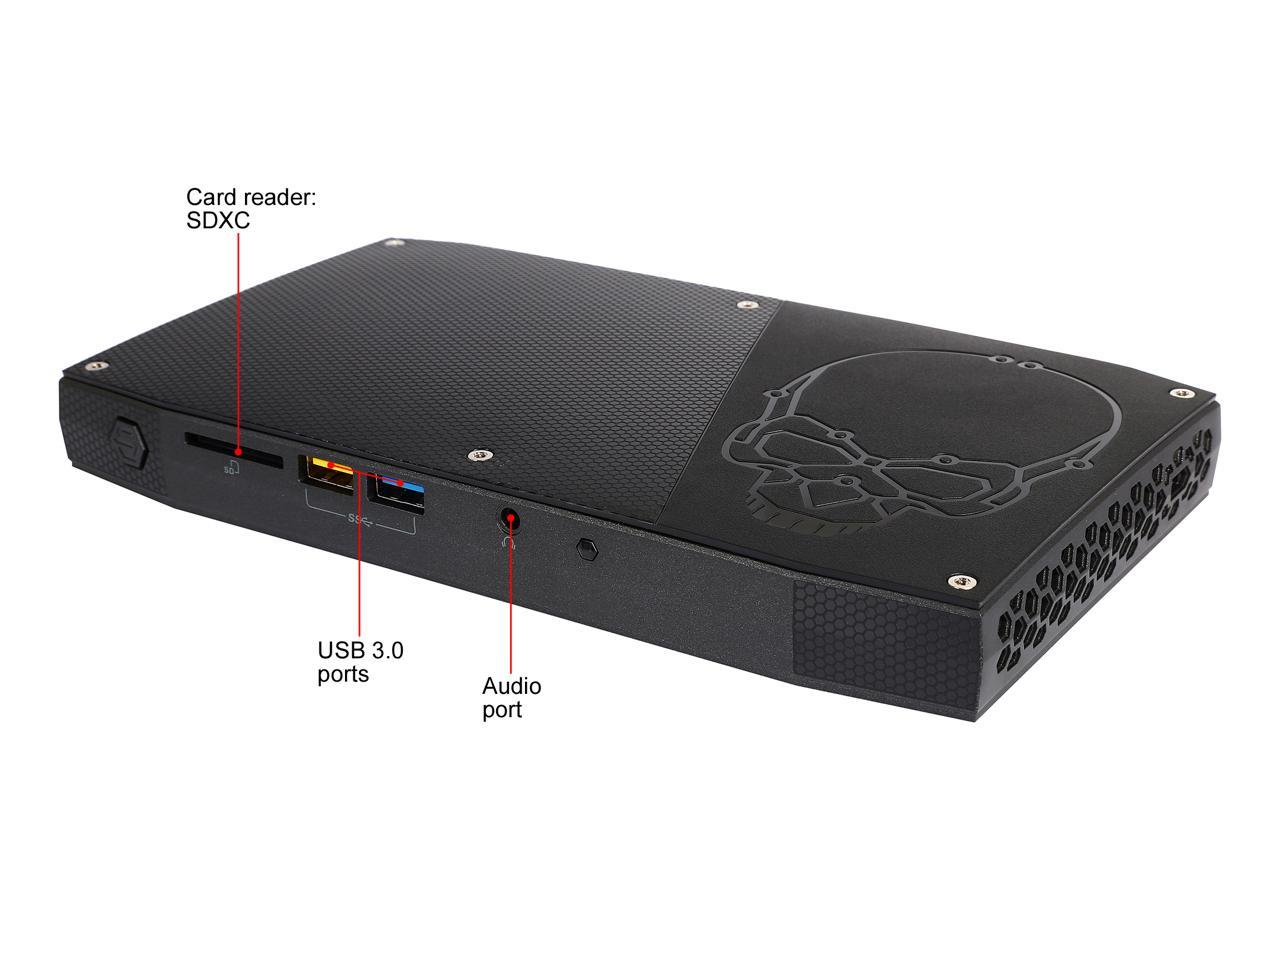 Intel NUC Skull Canyon NUC6i7KYK Kit with 6th Gen. Intel Core i7 Processor, M.2 SSD Compatible, Dual DDR4 Memory Max 32GB with Intel Iris Pro Graphics, Thunderbolt 3, No OS, Windows 10 Compatible